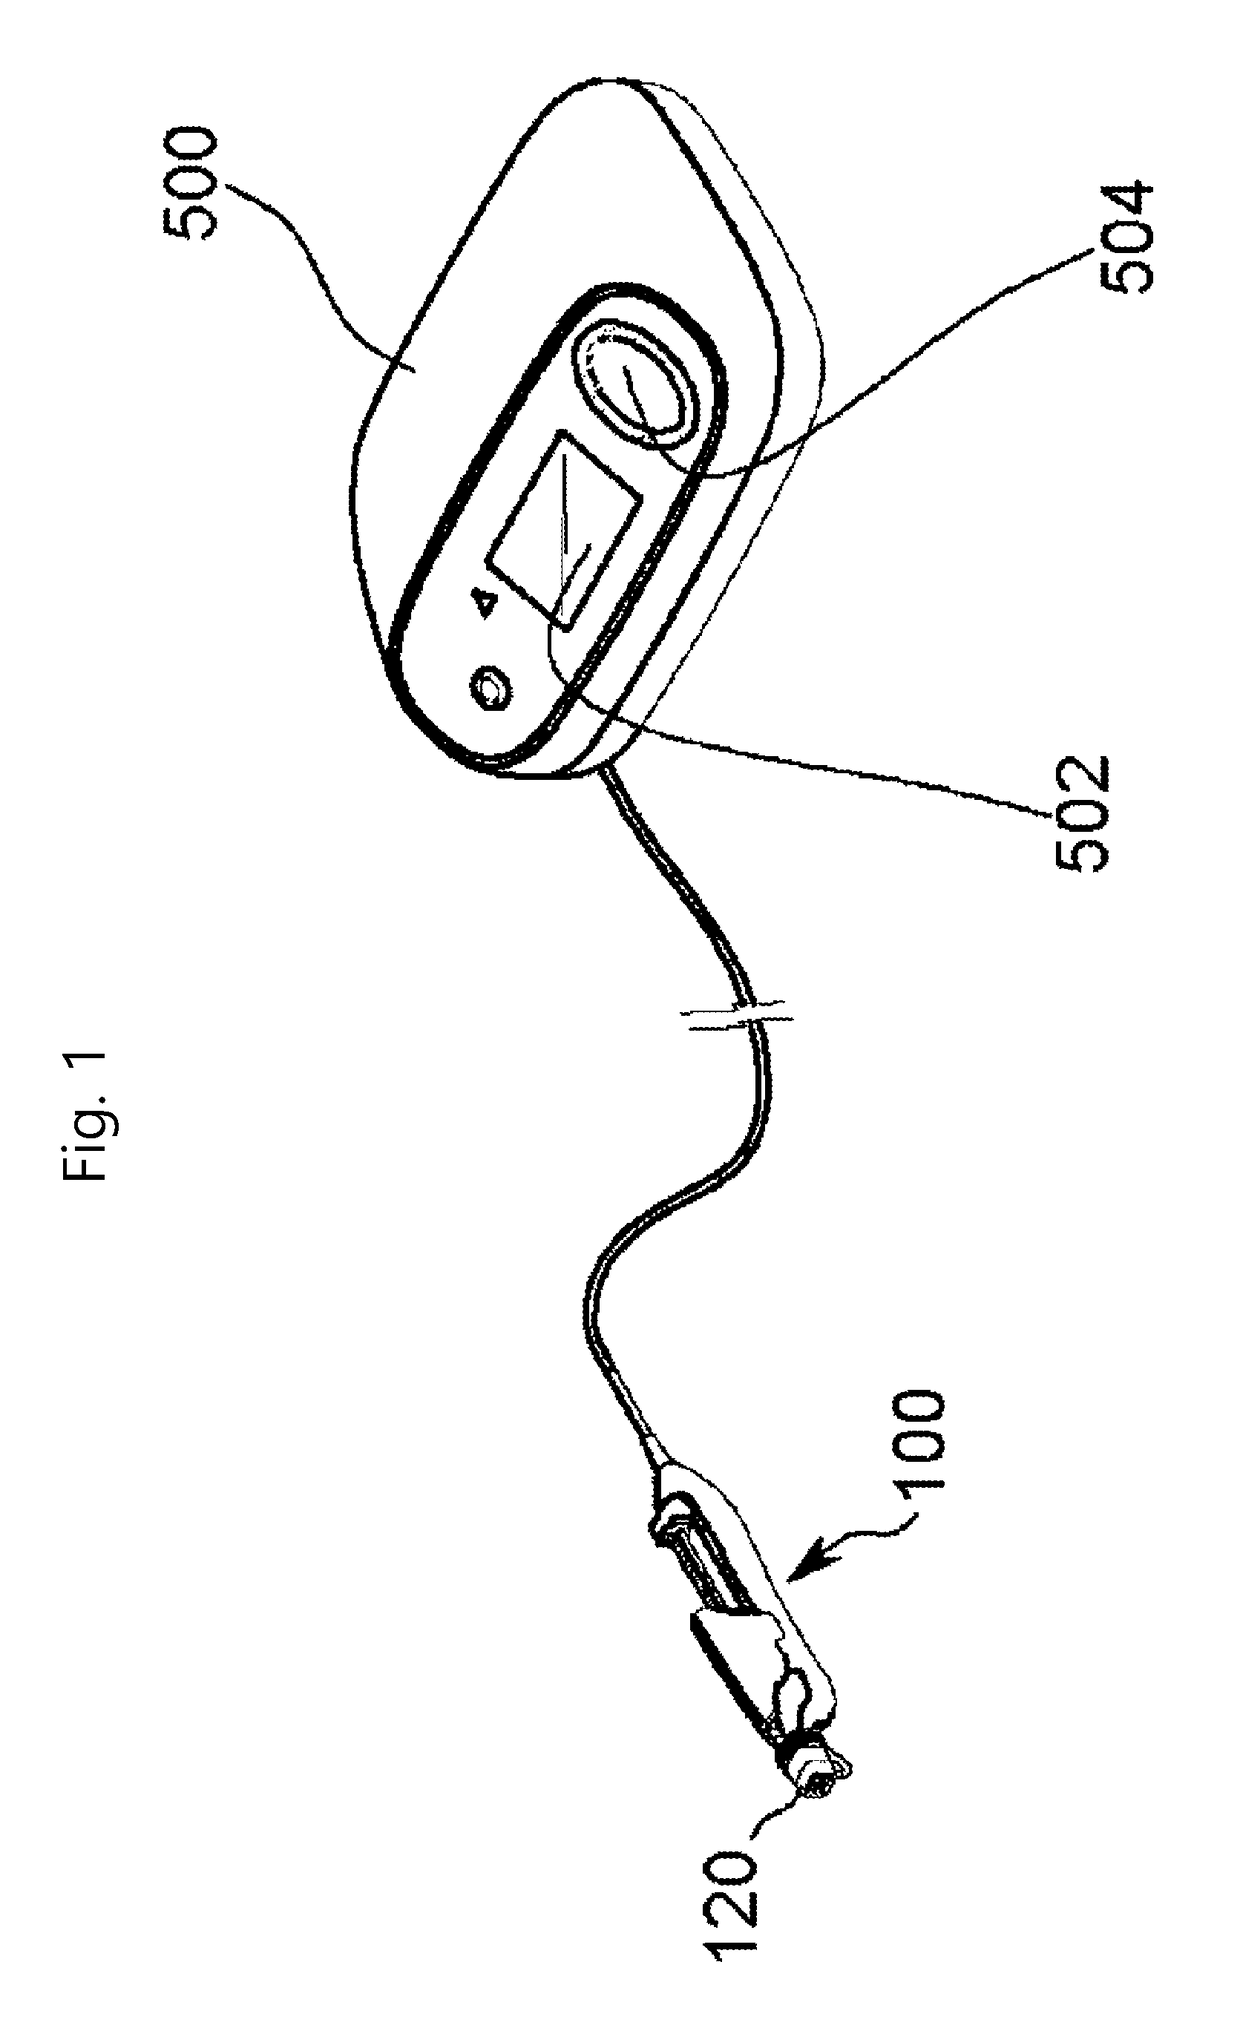 Injection apparatus and injection method using same